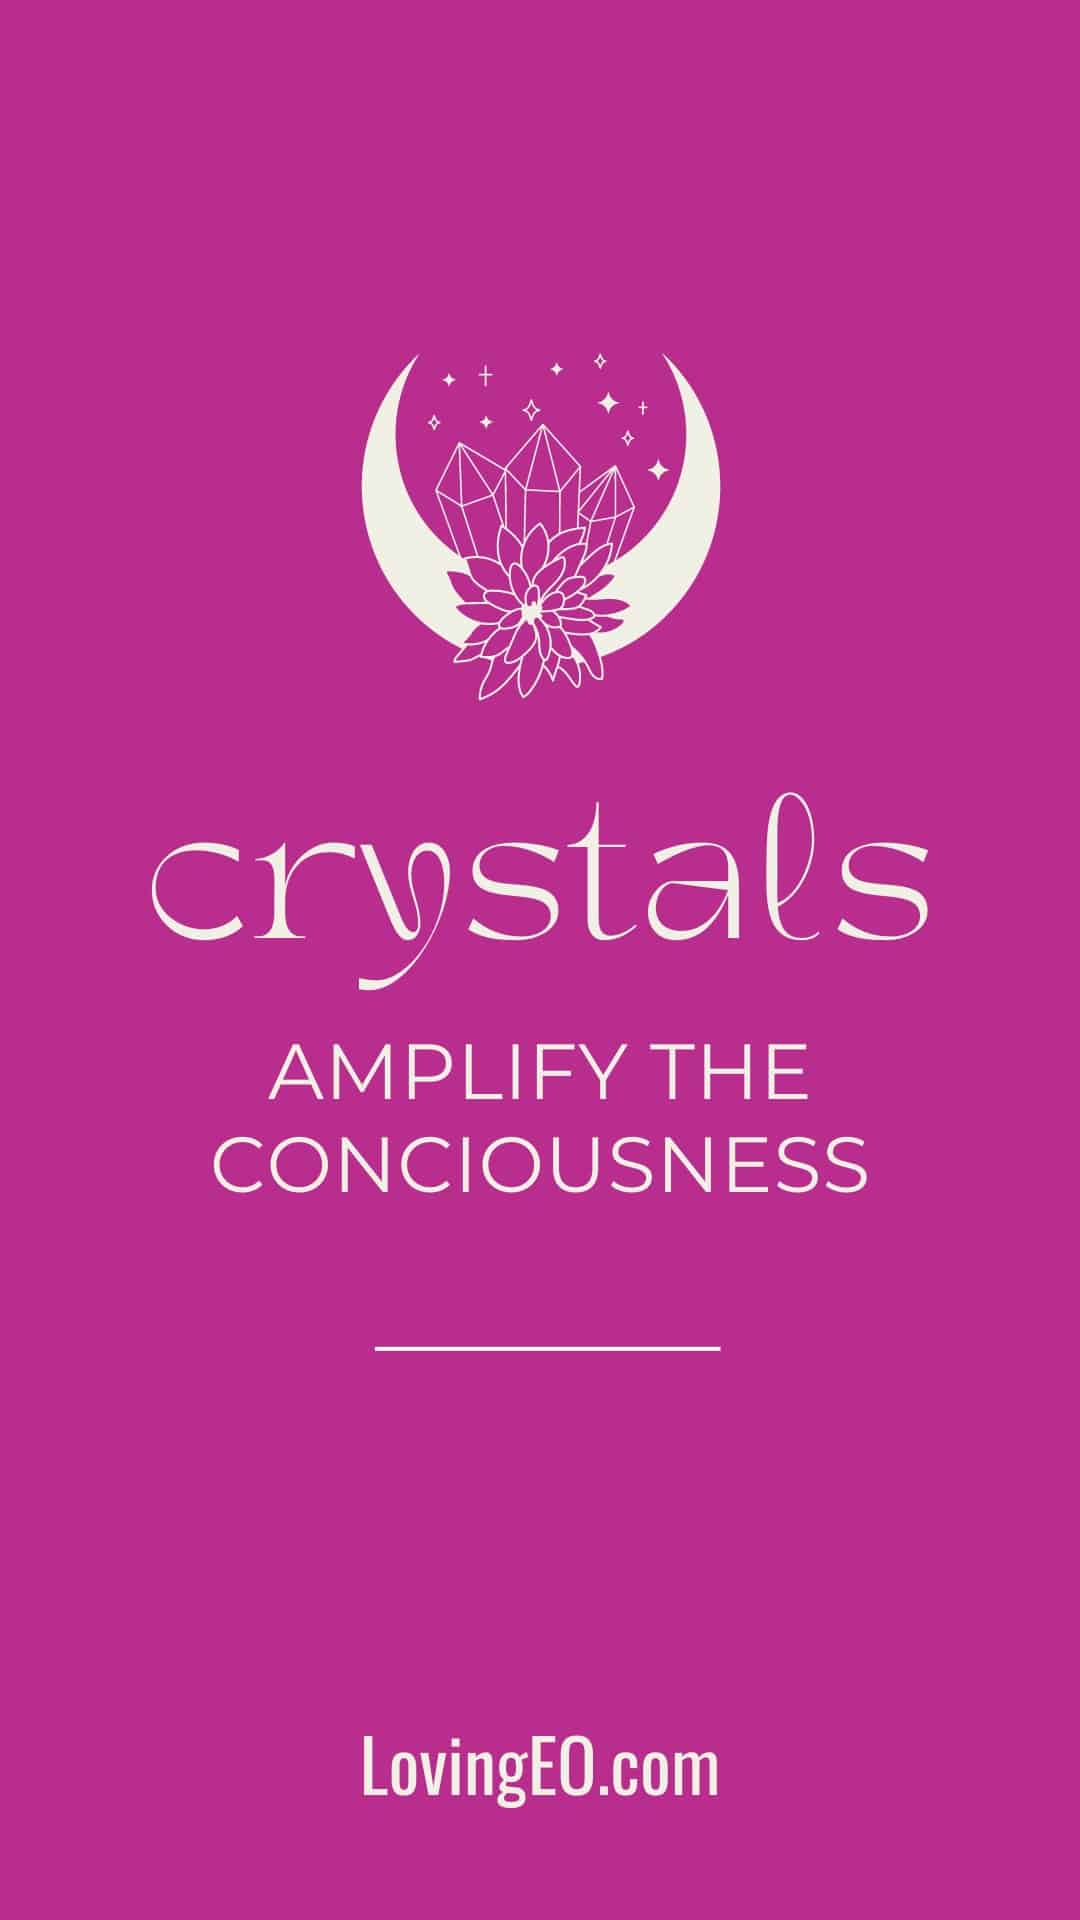 How to Use Crystals for Healing - Healing Crystal Jewelry and Gemstones